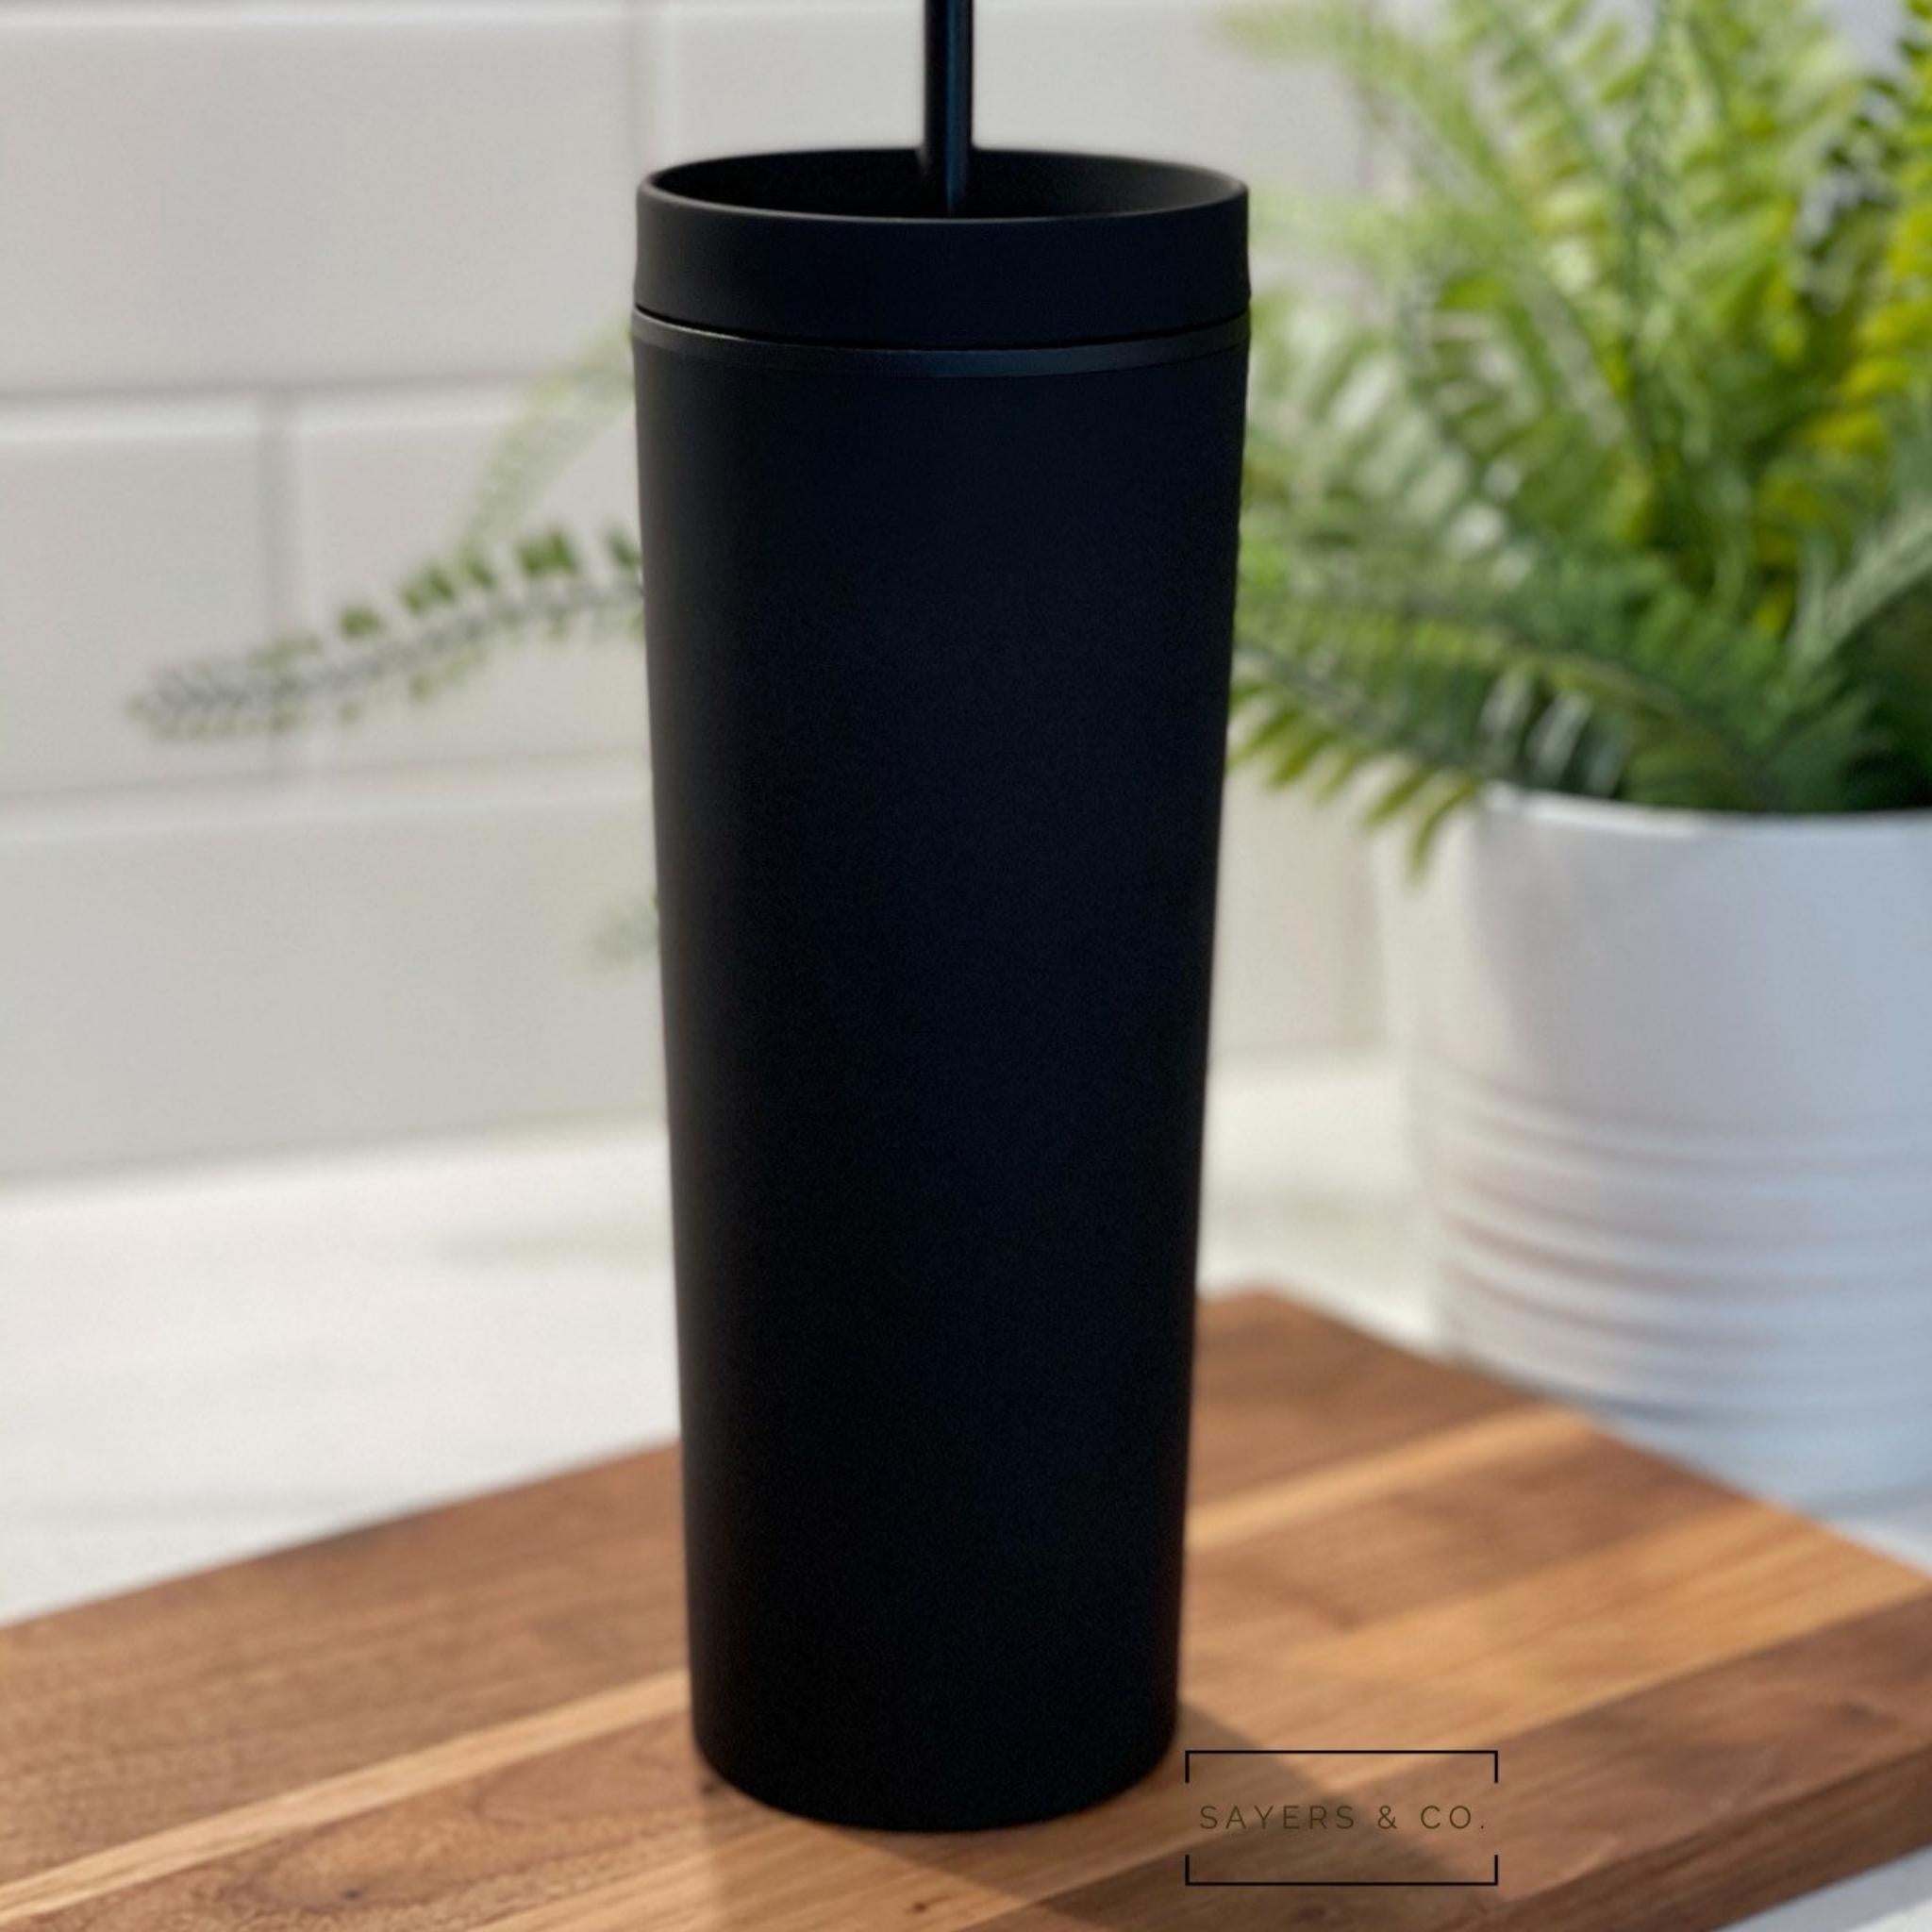 19oz. Black Stainless Steel Tumbler with Straw by Celebrate It™